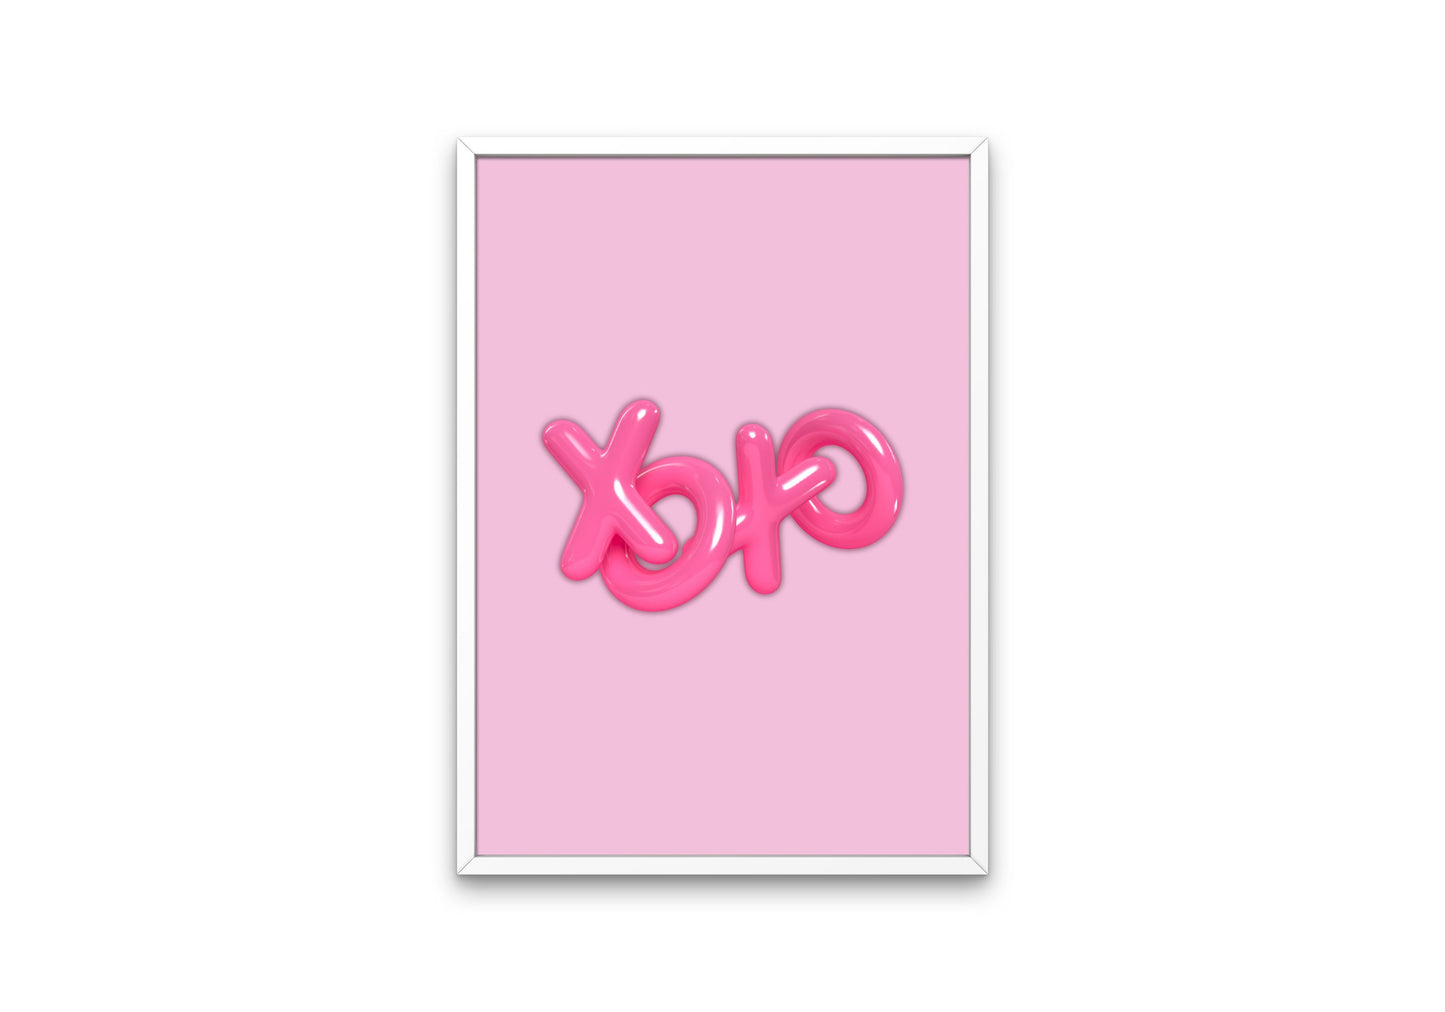 XOXO Poster INSTANT DOWNLOAD, one piece poster, Pink Preppy Wall Art, Preppy decor, Trendy Dorm Prints, Academia aesthetic, balloon wall art